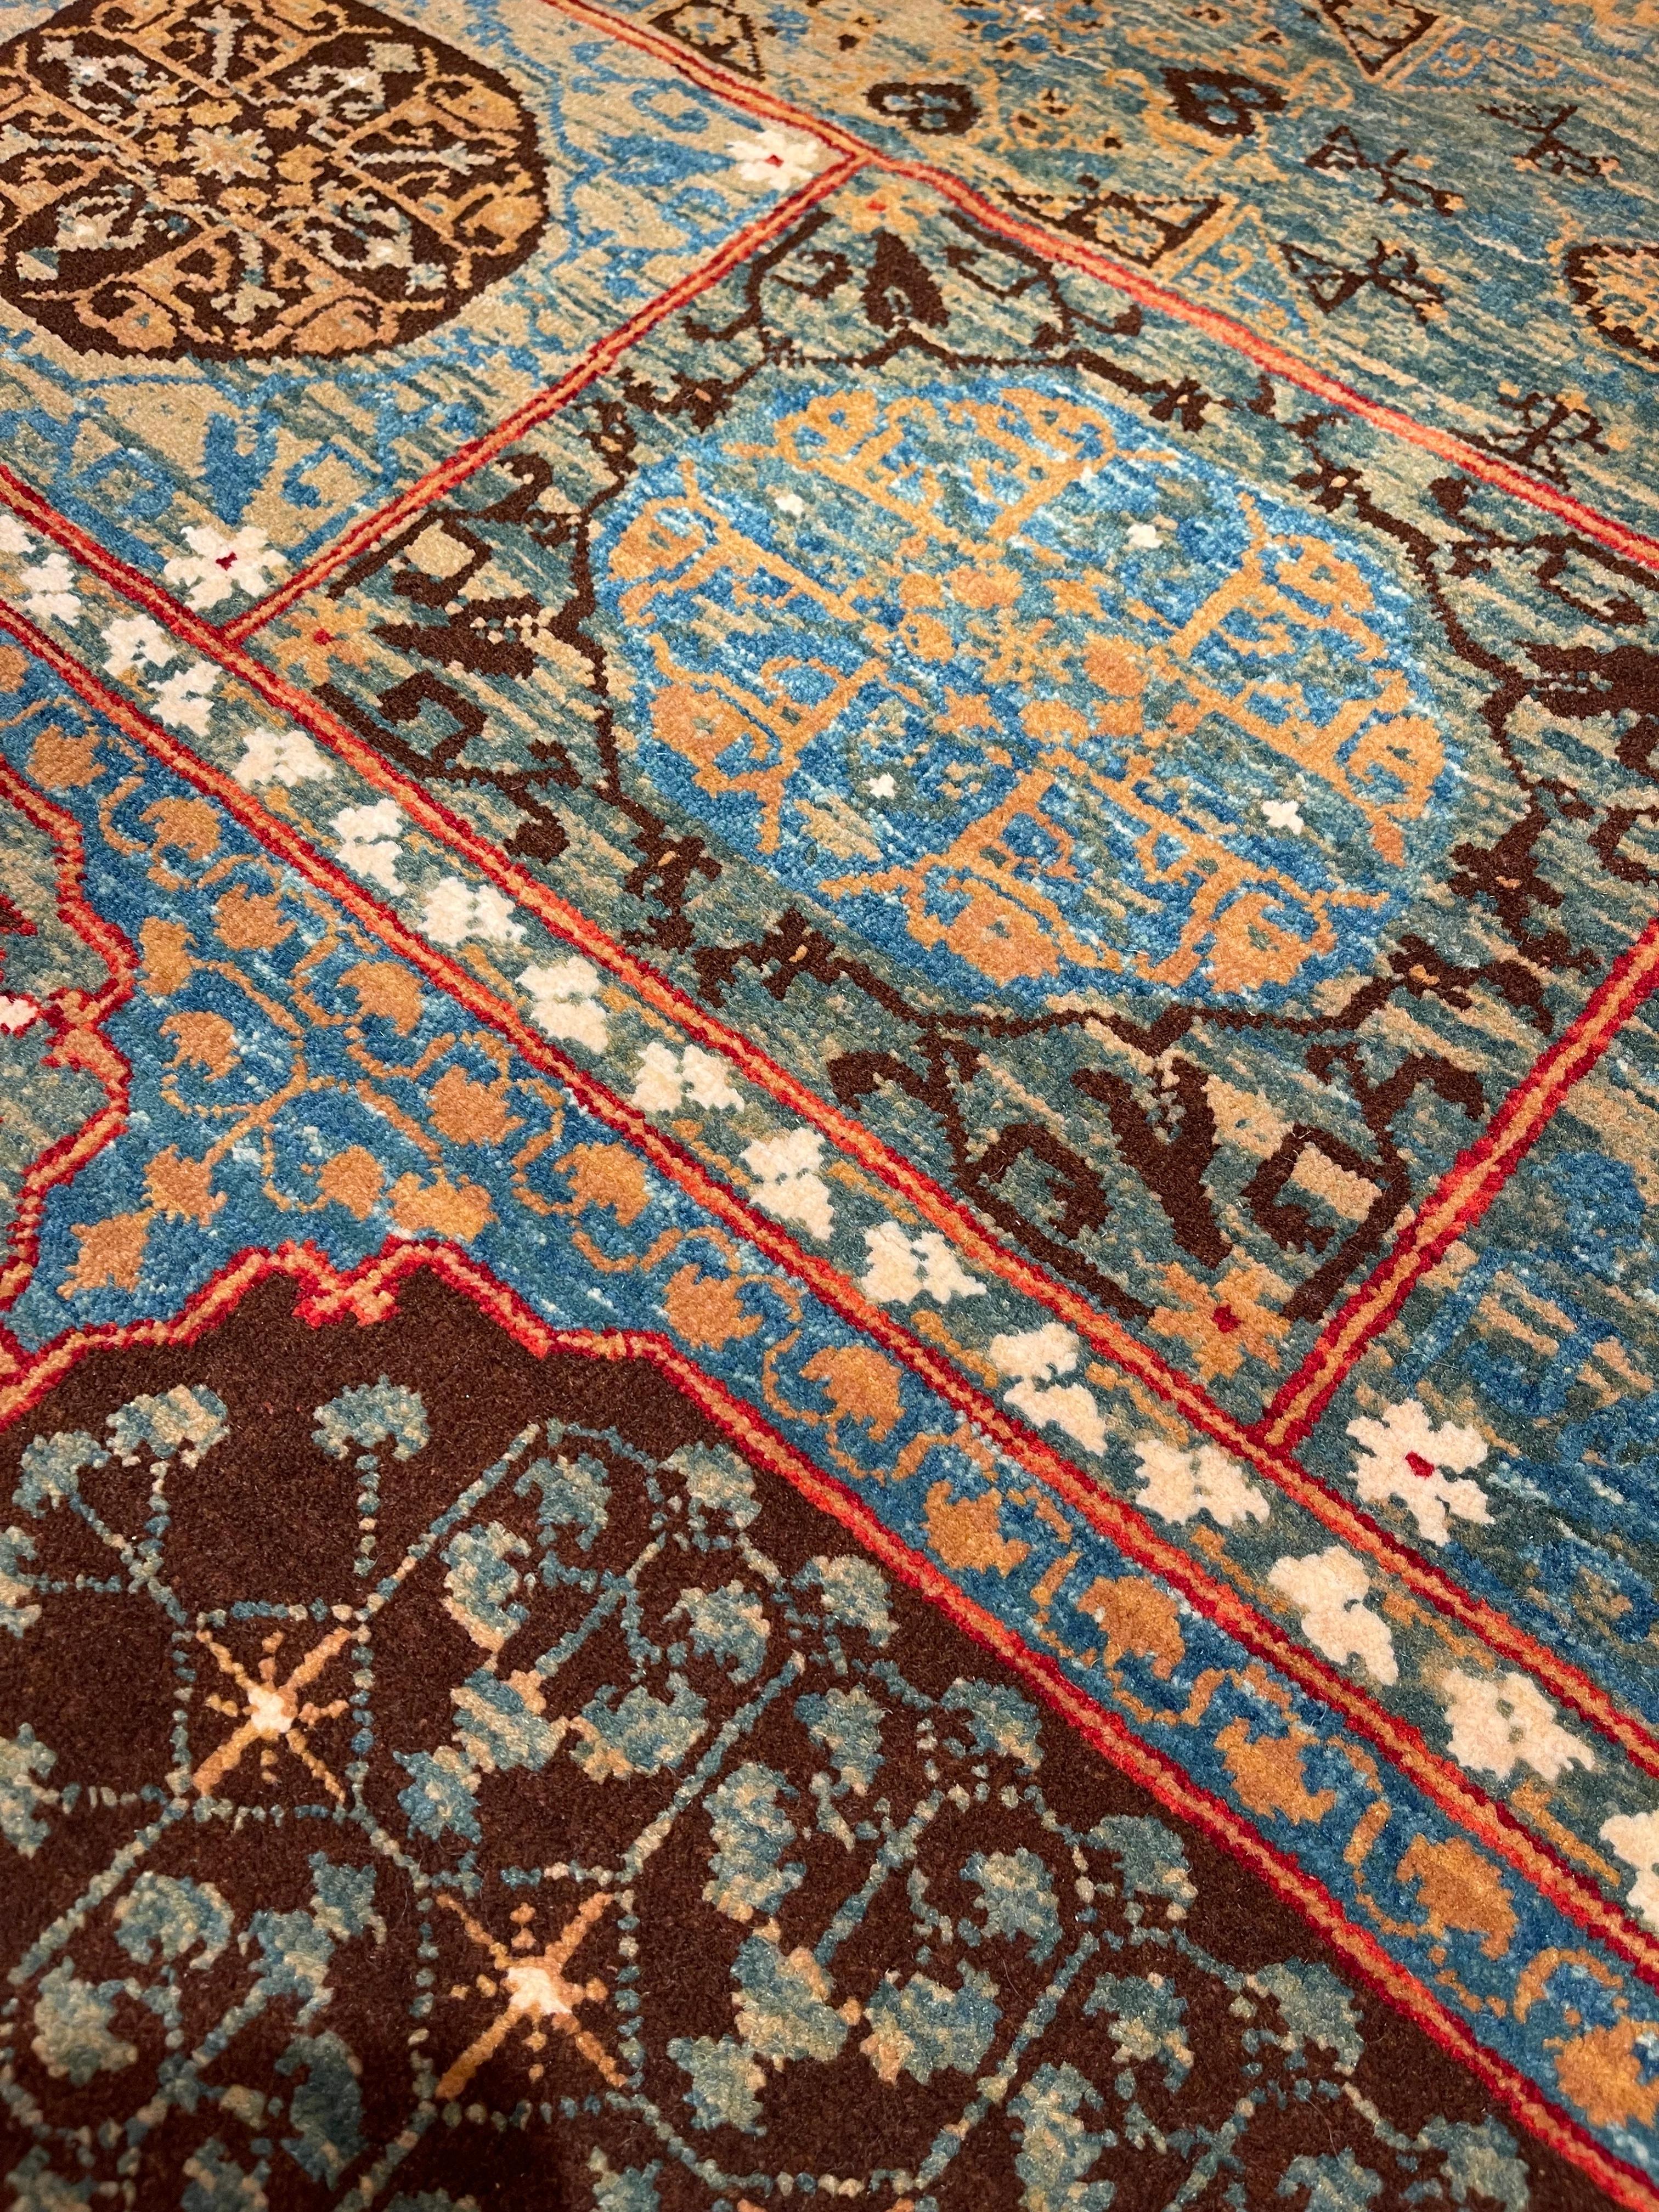 The source of carpet comes from the book How to Read – Islamic Carpets, Walter B. Denny, The Metropolitan Museum of Art, New York 2014 fig.61,62. The five-star-medallion carpet was designed in the early 16th century by Mamluk Sultane of Cairo,